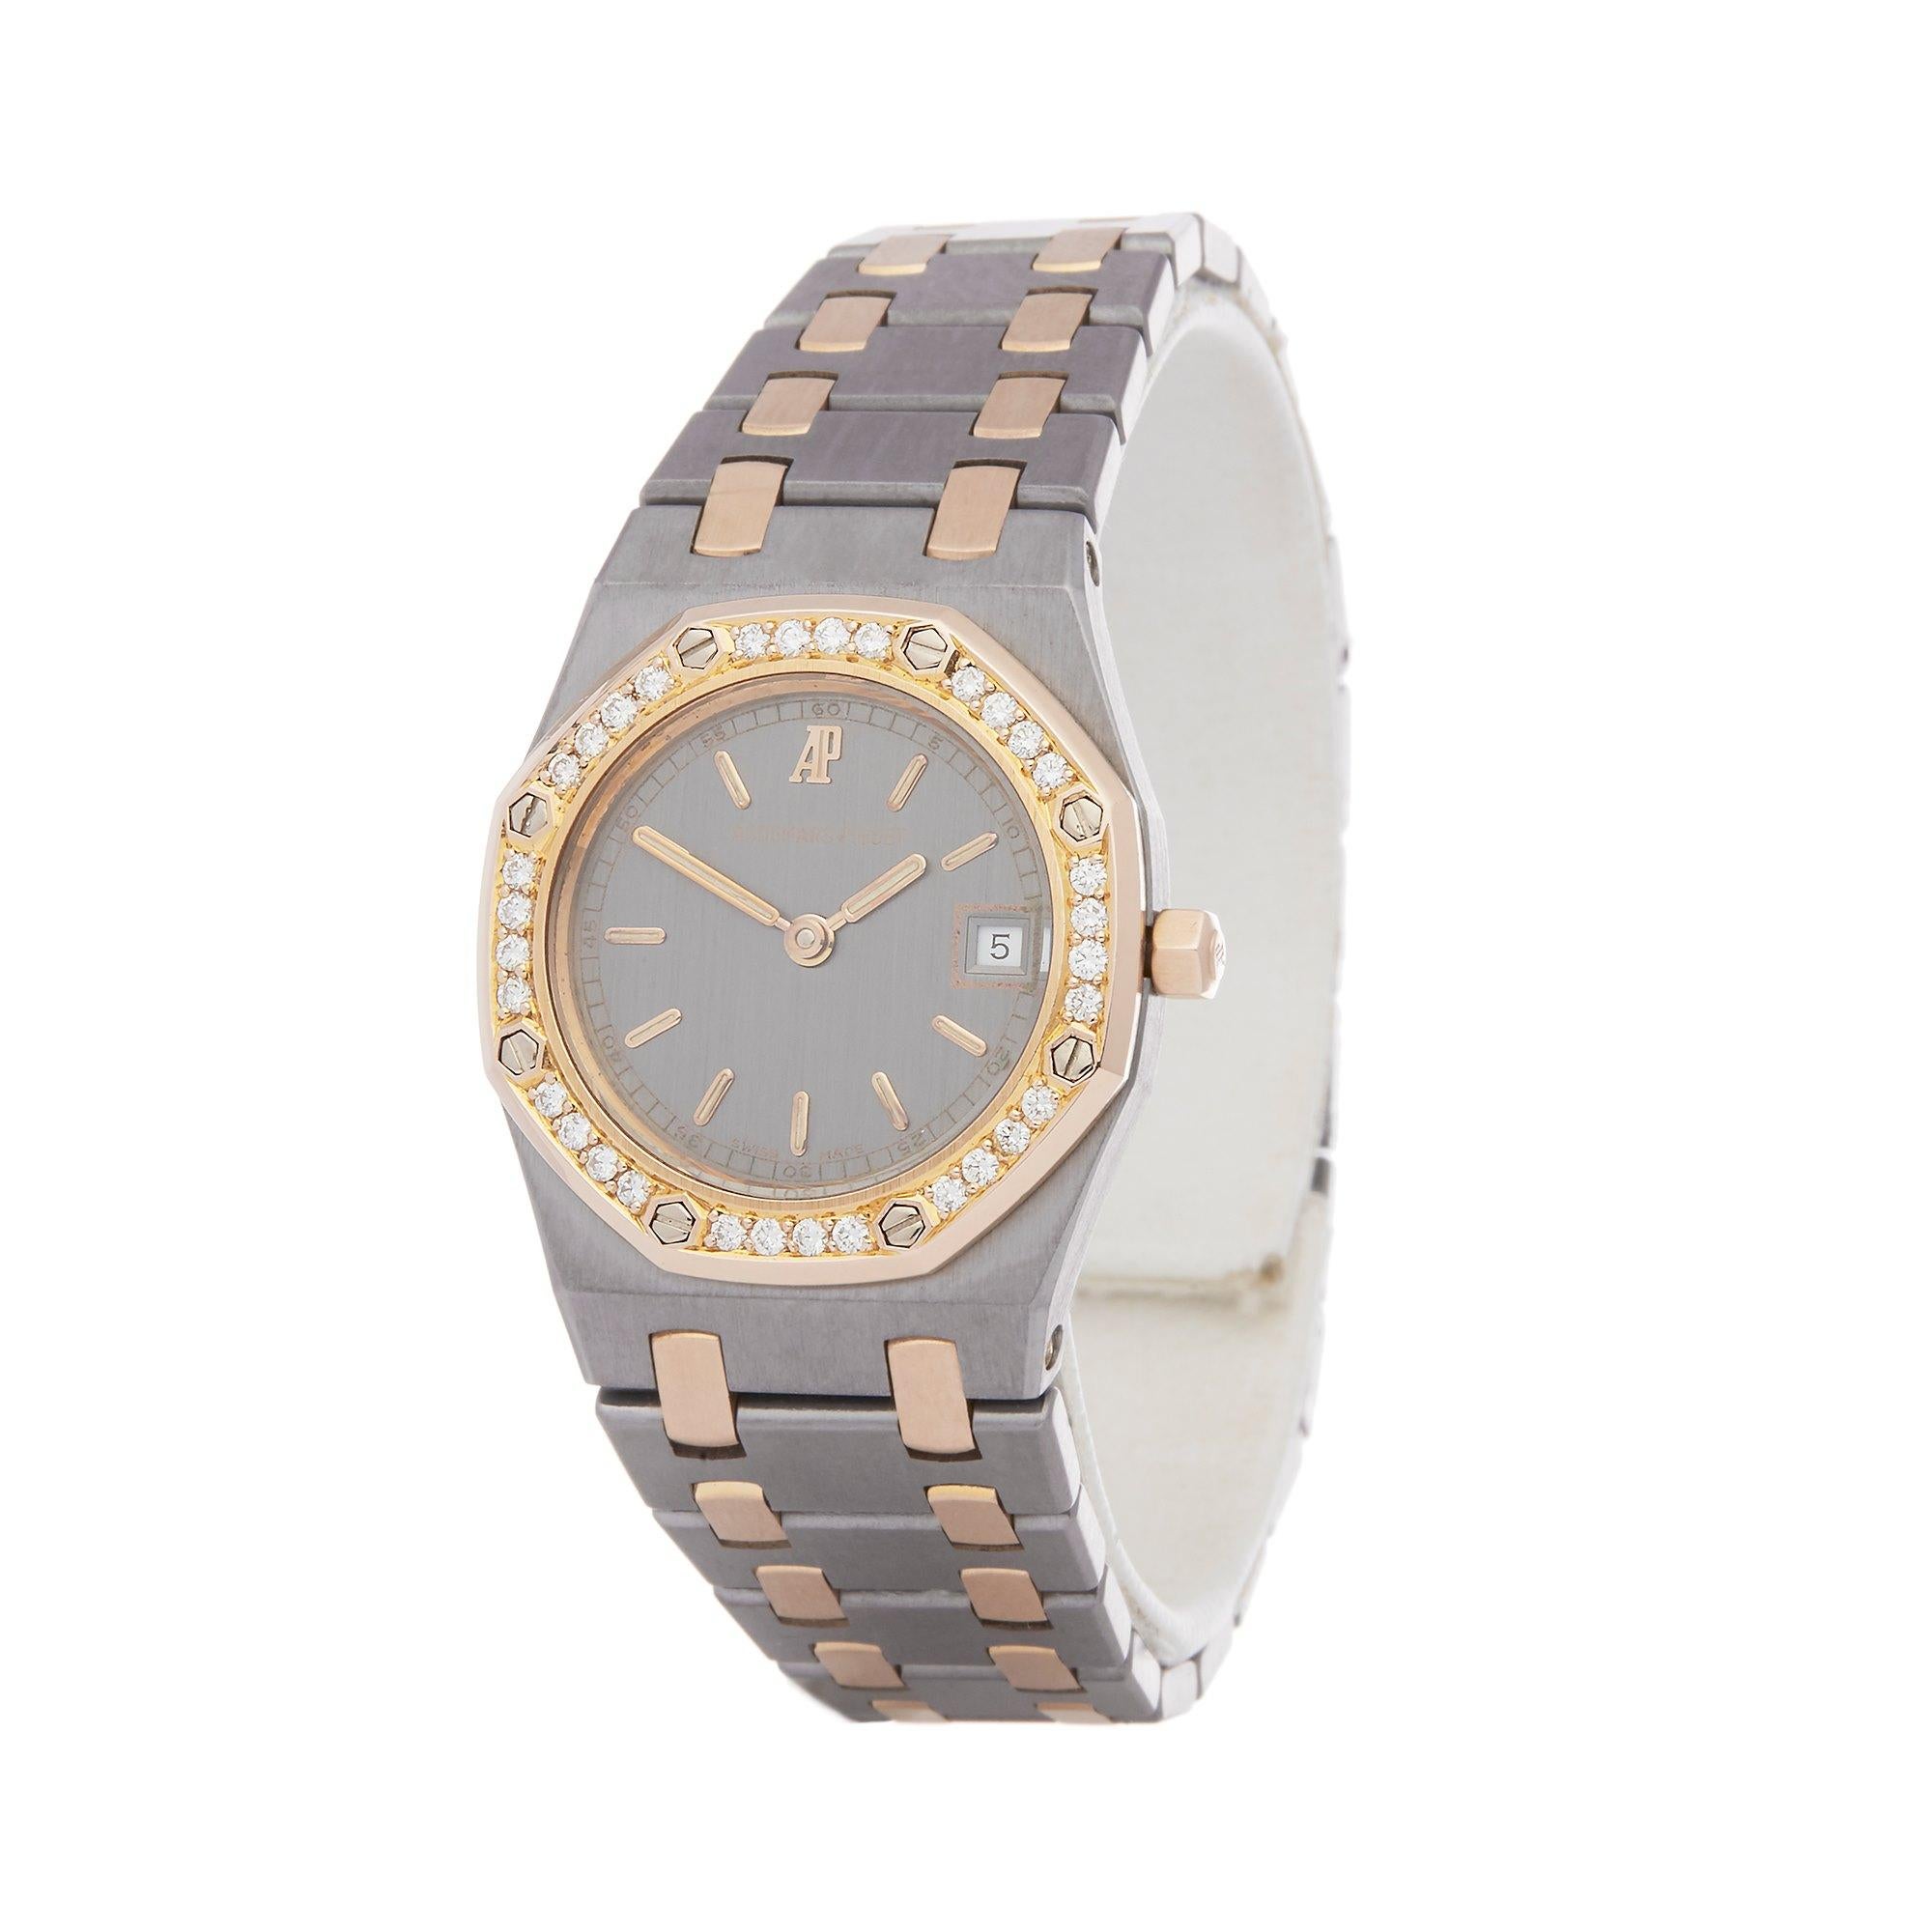 Xupes Reference: COM002547
Manufacturer: Audemars Piguet
Model: Royal Oak
Model Variant: 
Model Number: 66319-722
Age: 05-10-1993
Gender: Ladies
Complete With: Xupes Presentation Box, Manuals & Guarantee
Dial: Brushed Grey Baton
Glass: Sapphire